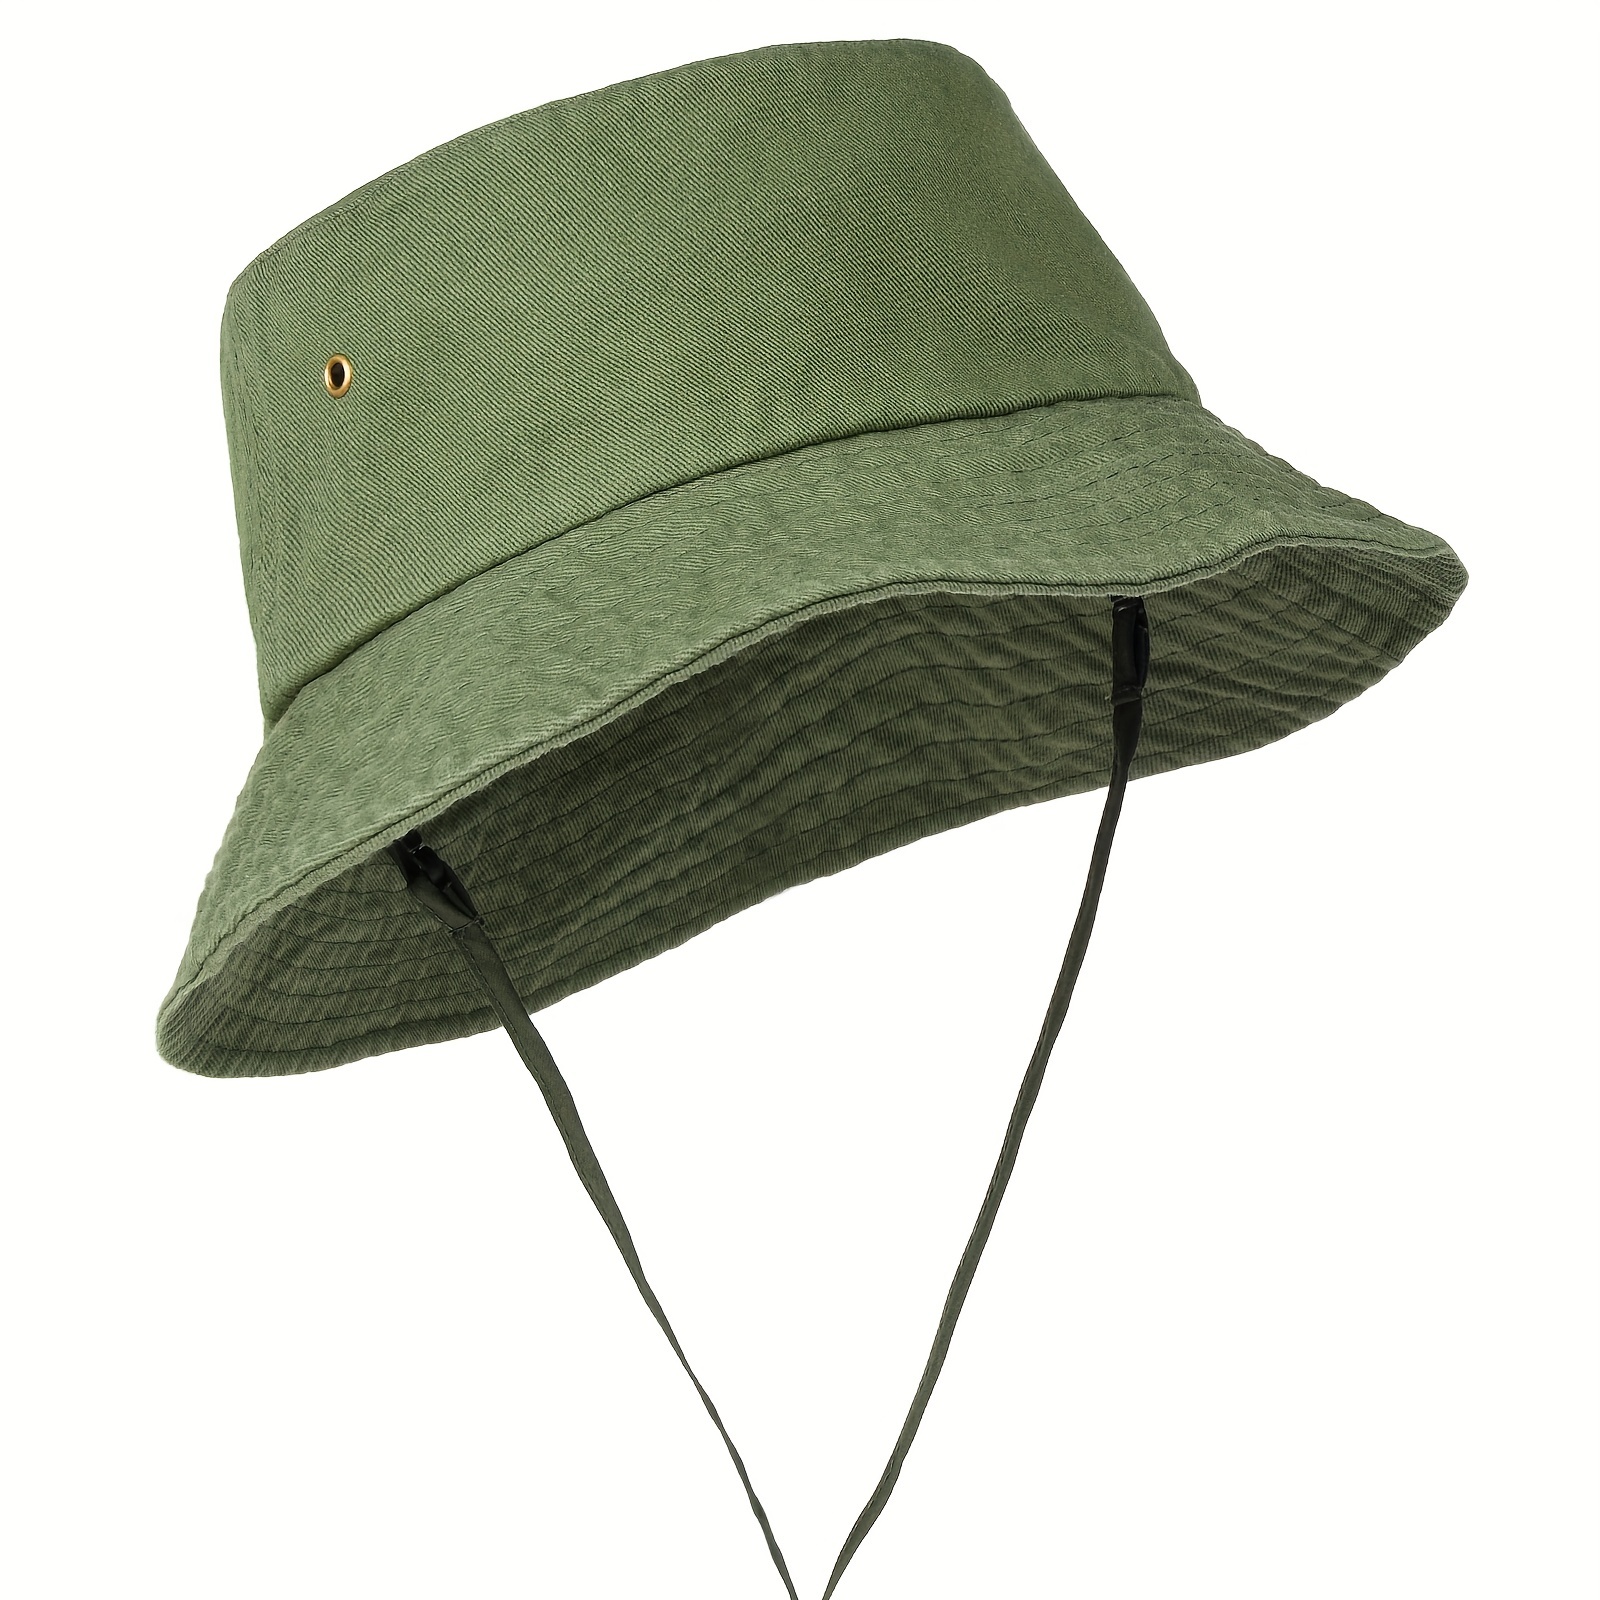 enqiretly Fishing Hat Vintage Japanese Style Men Women Dome Sunproof  Drawstring Outdoor Easy Matching Cap Headgear Accessories Green 